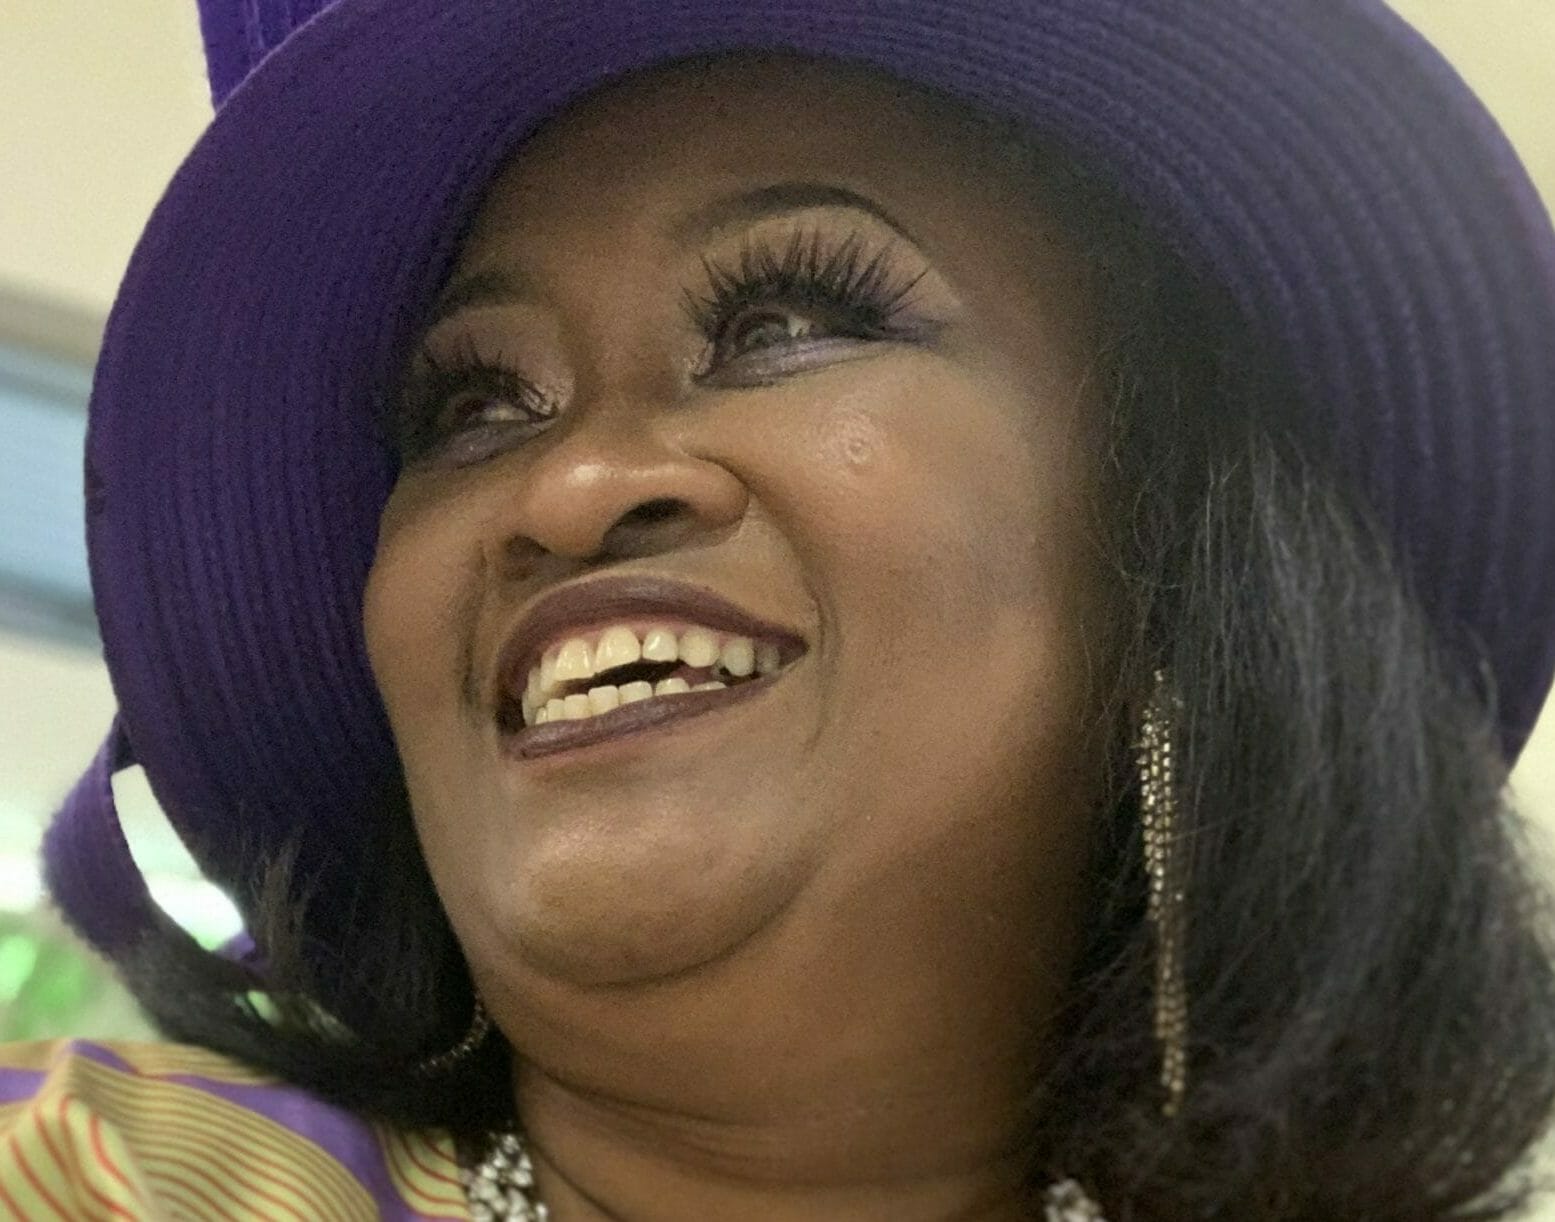 RENEE W., a smiling black woman in a yellow and lavender print dress with a bead necklace and black hat.